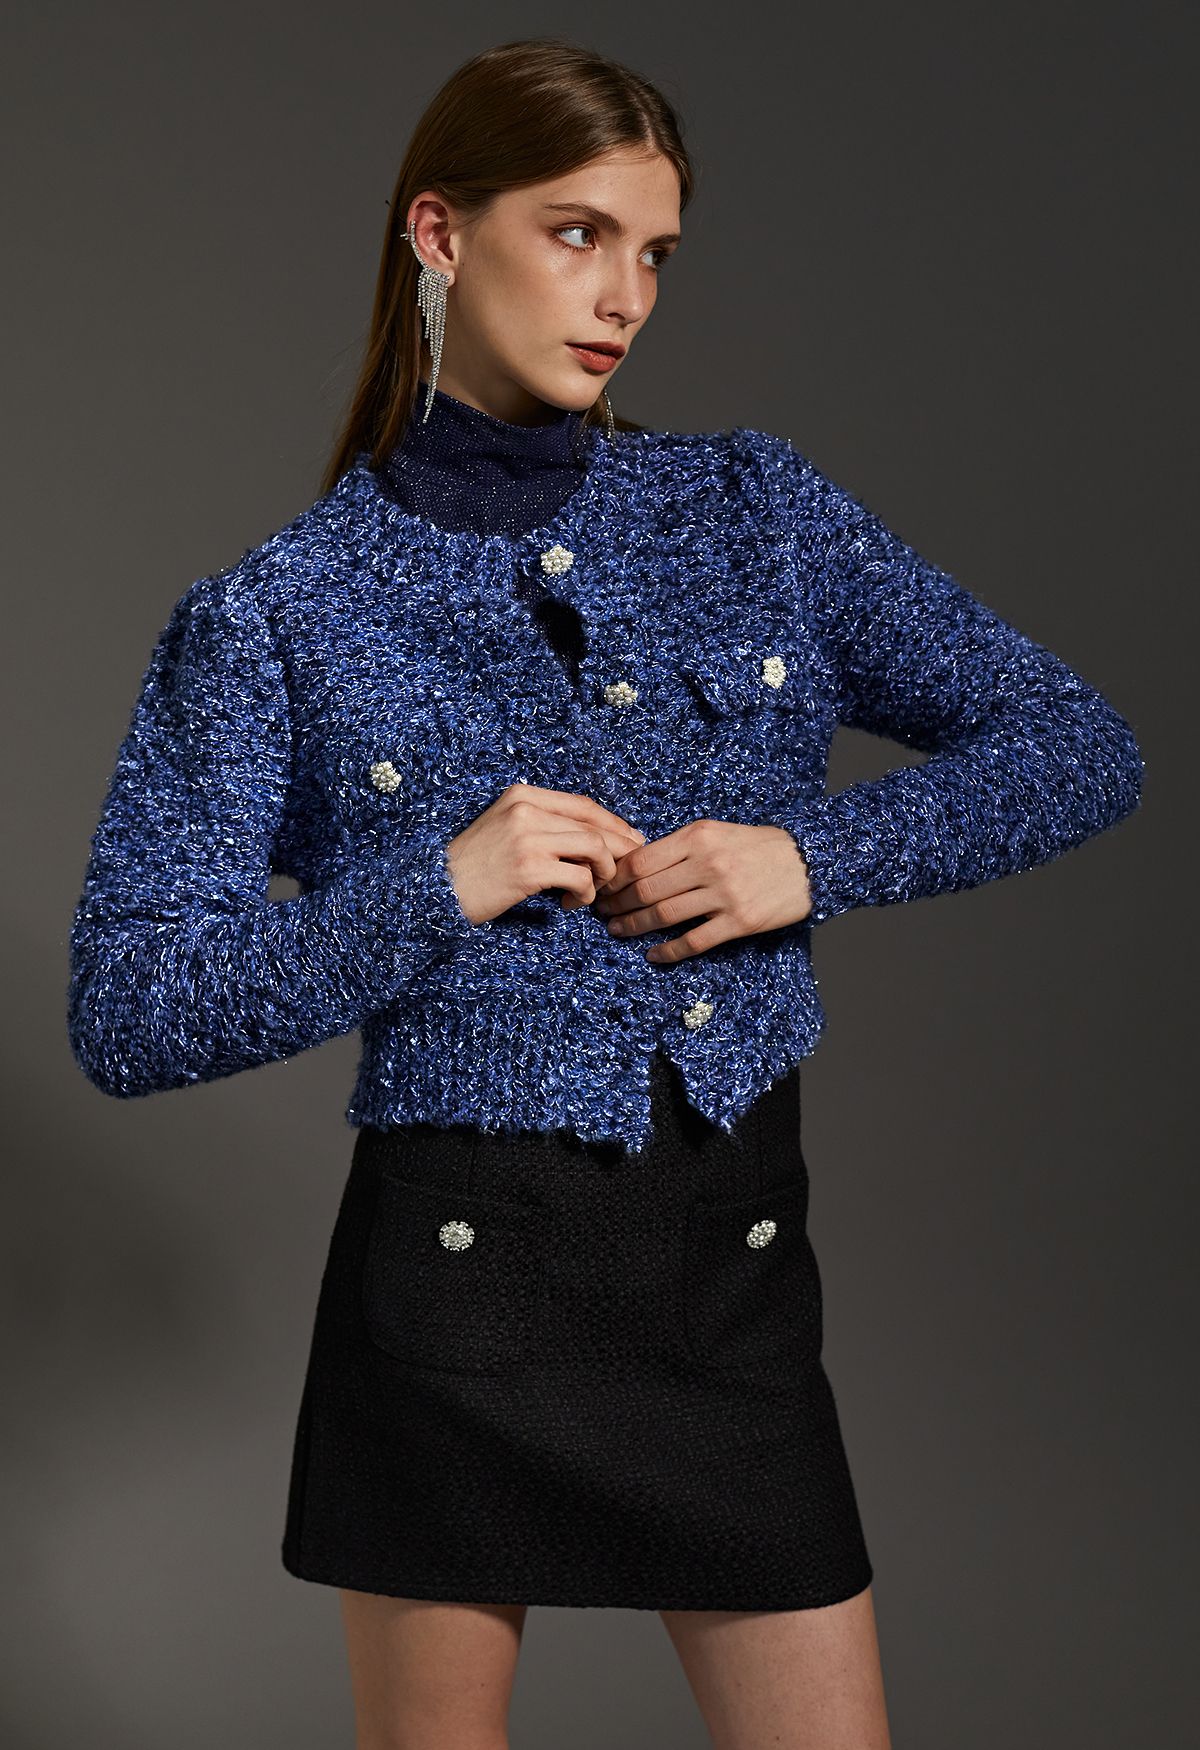 Pearly Button Shimmer Fuzzy Crop Cardigan in Blue